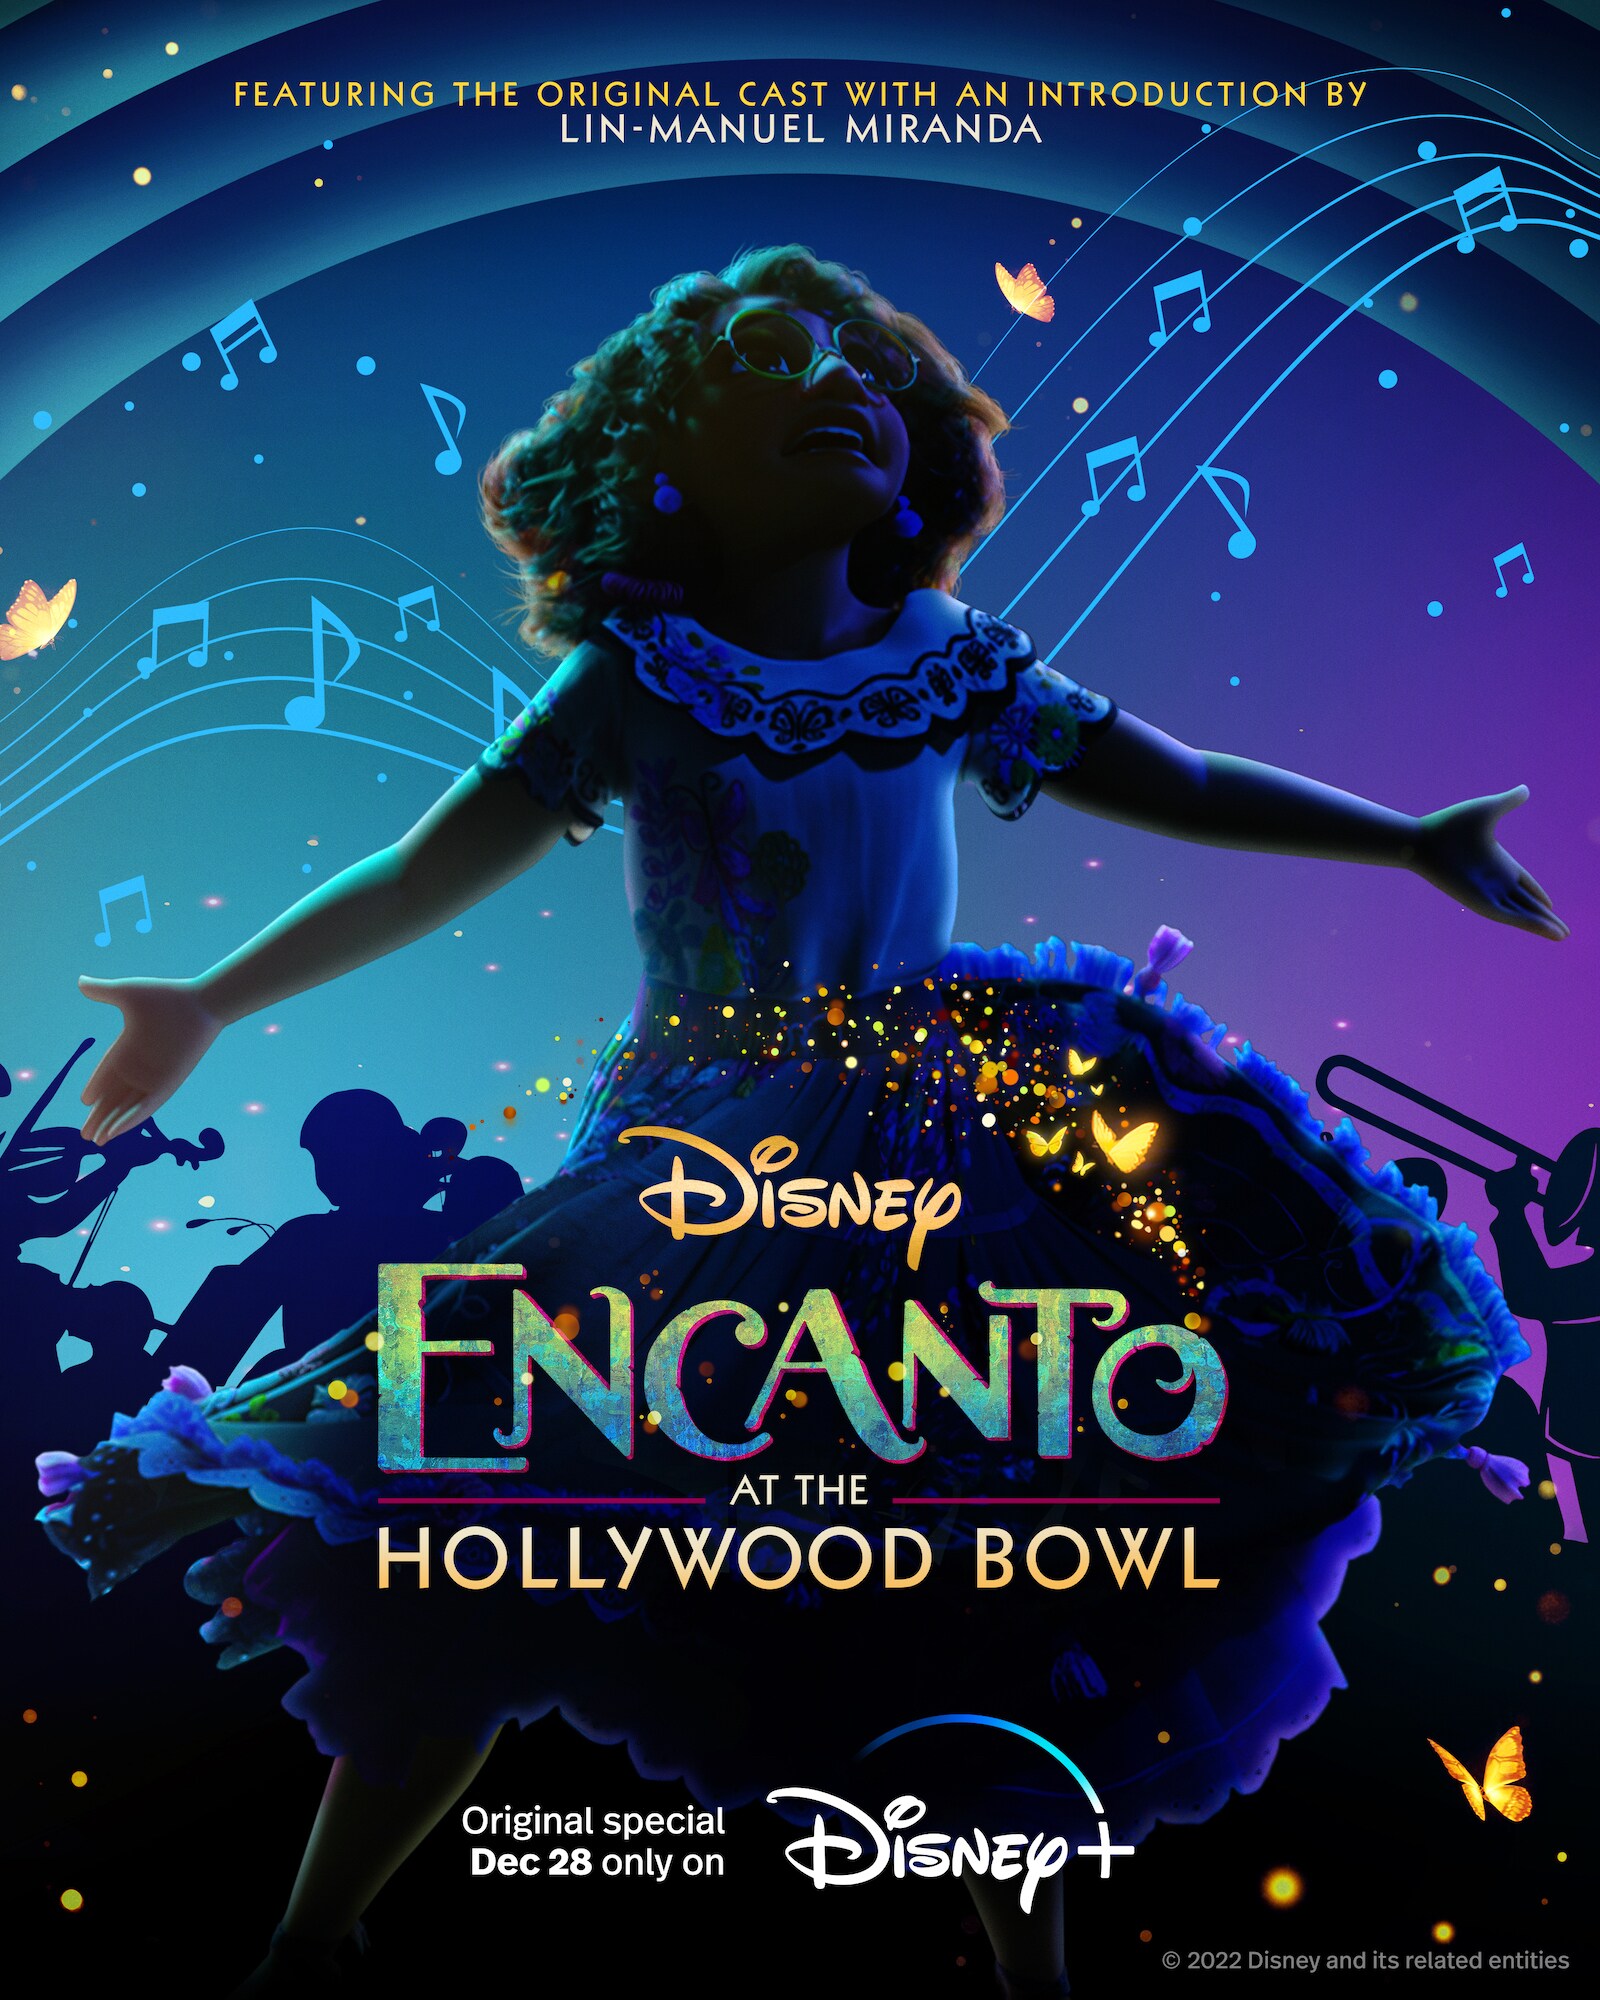 New Trailer And Key Art Now Available For 'Encanto At The Hollywood Bowl,'  Streaming Dec. 28 On Disney+